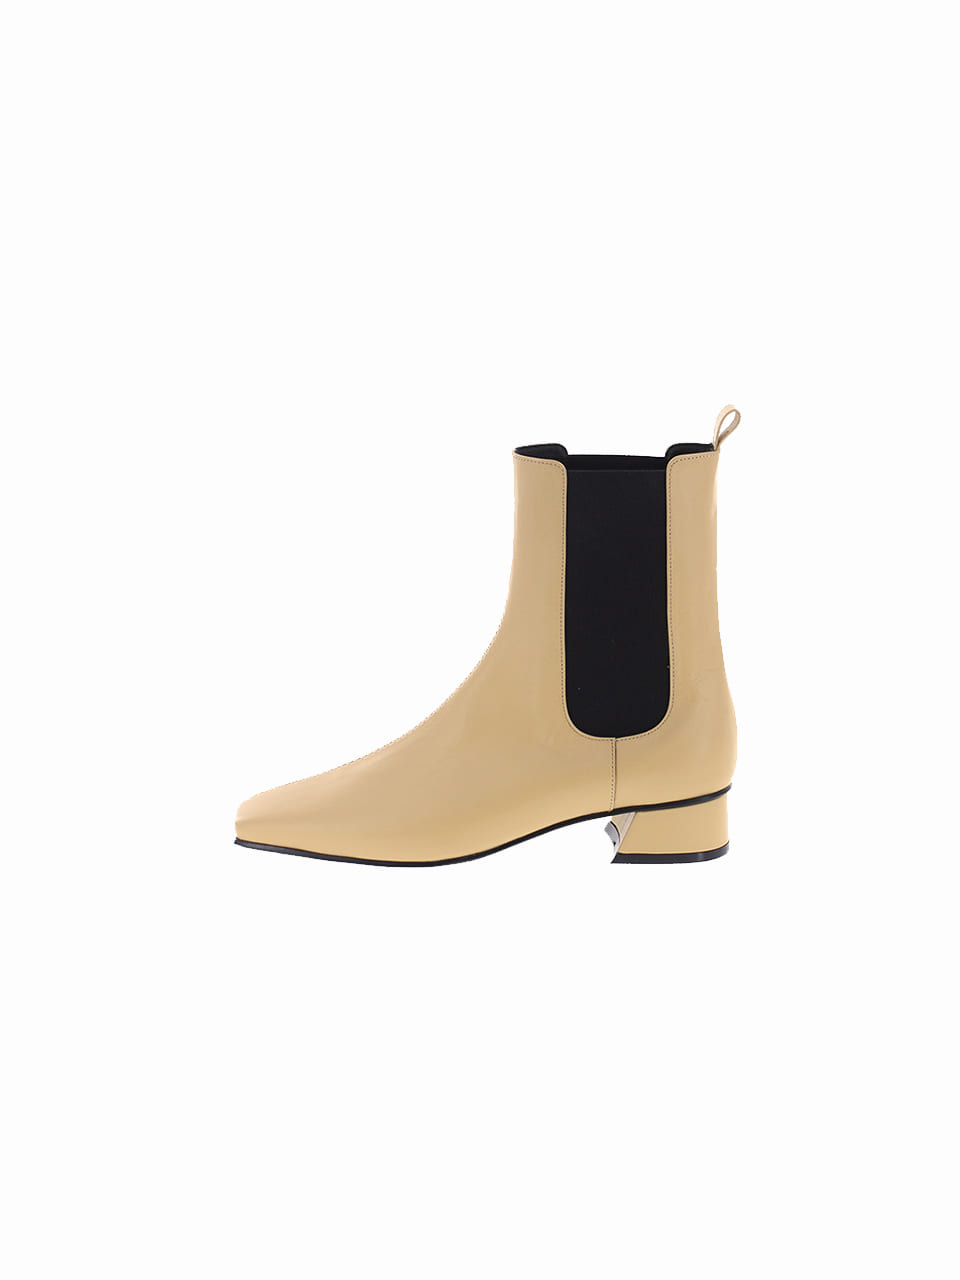 ZQI middle boots_yellowbeige